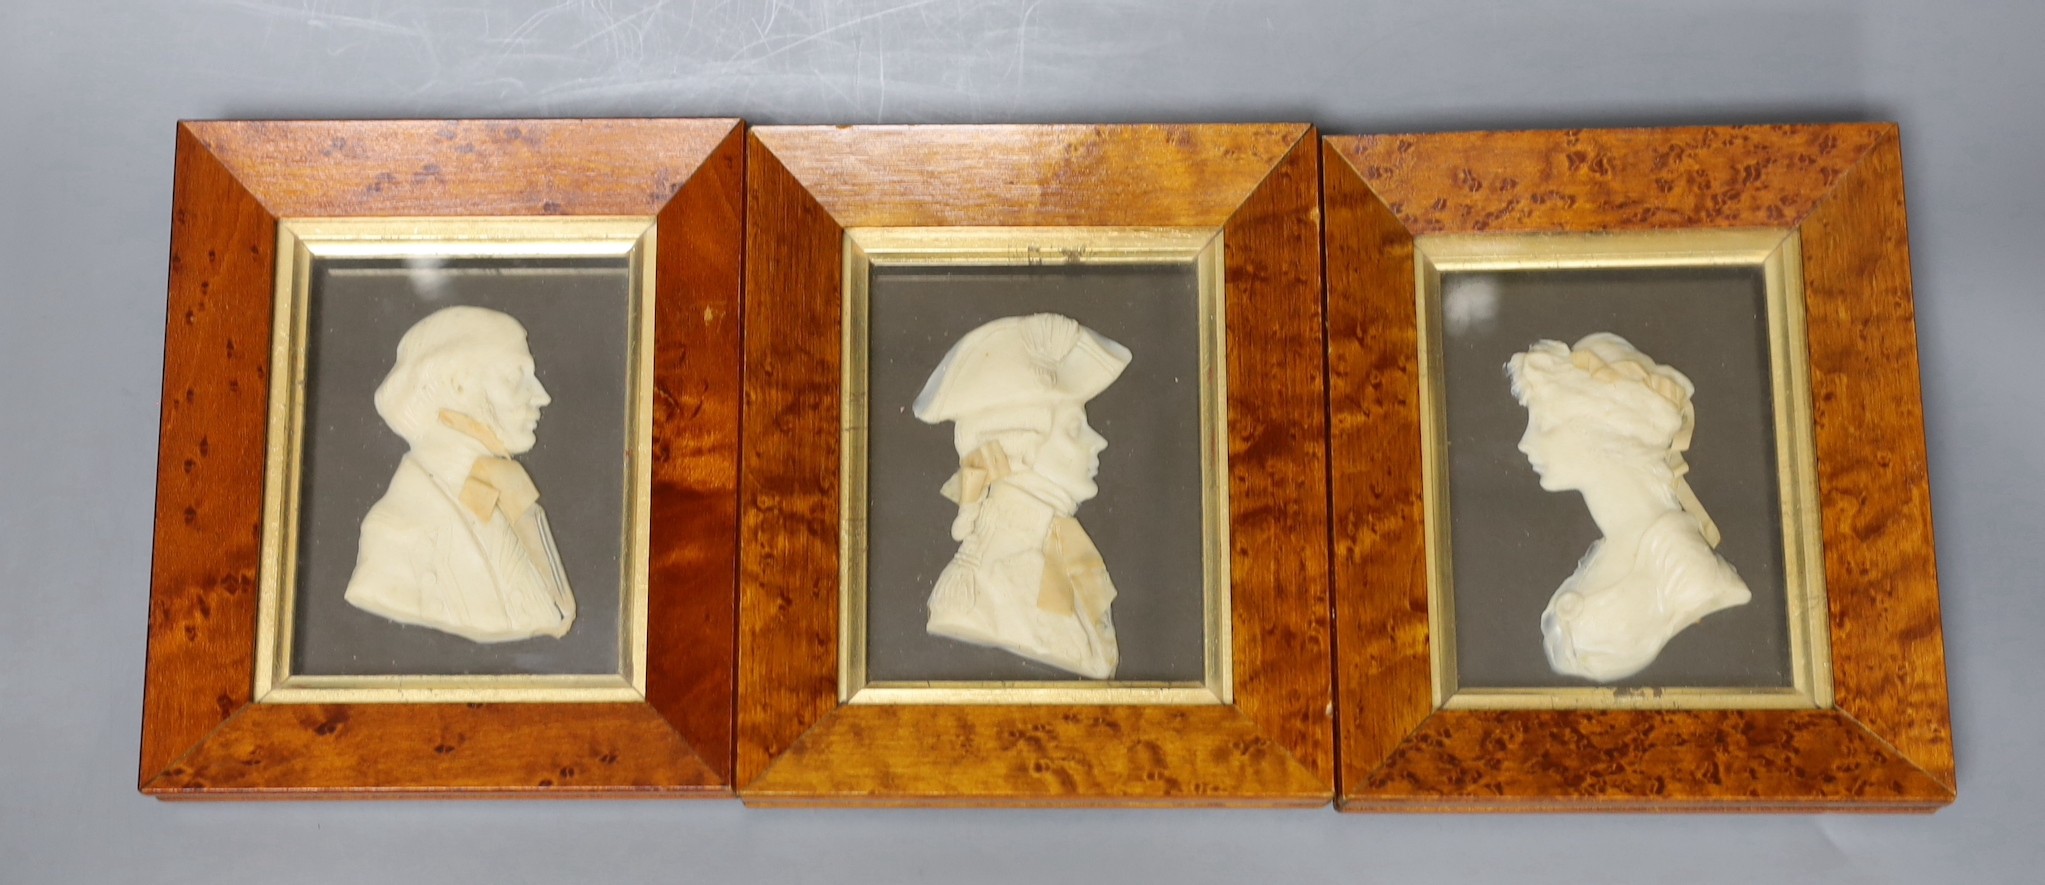 Three Maple framed framed wax portrait reliefs by Leslie Ray, 10 cms high x 8 cms wide